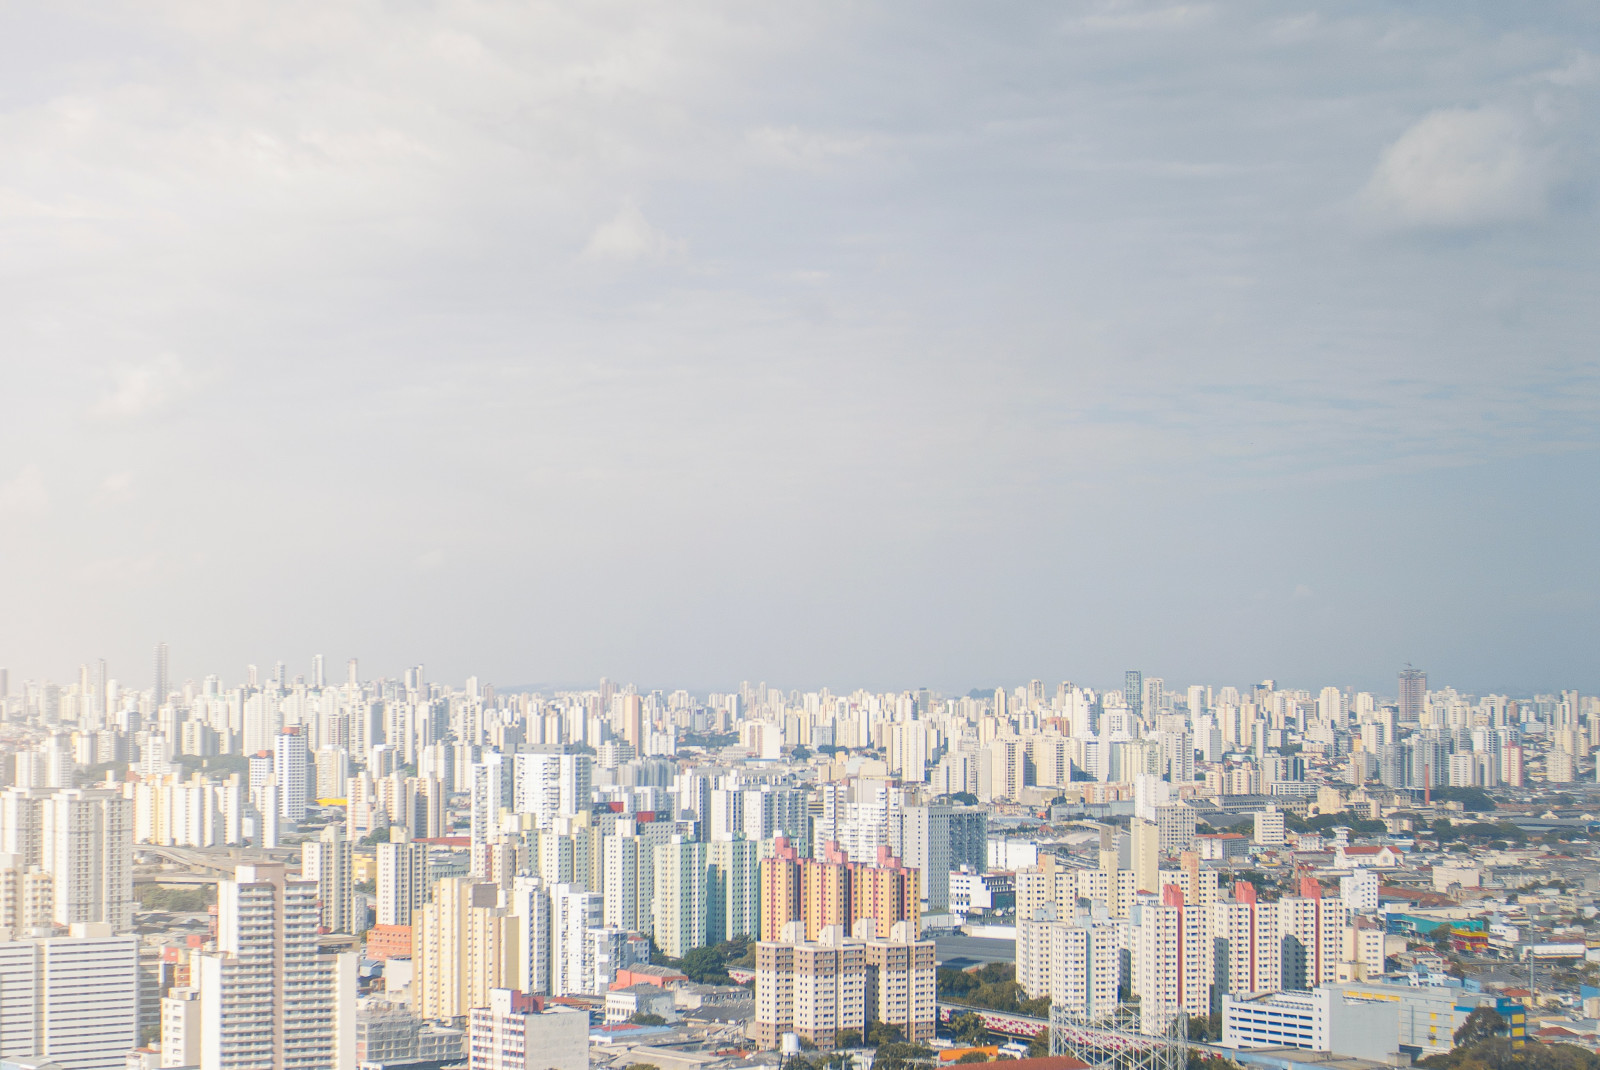 White building cityscape of São Paulo in Brazil with blue skies and green trees scattered amongst the buildings.